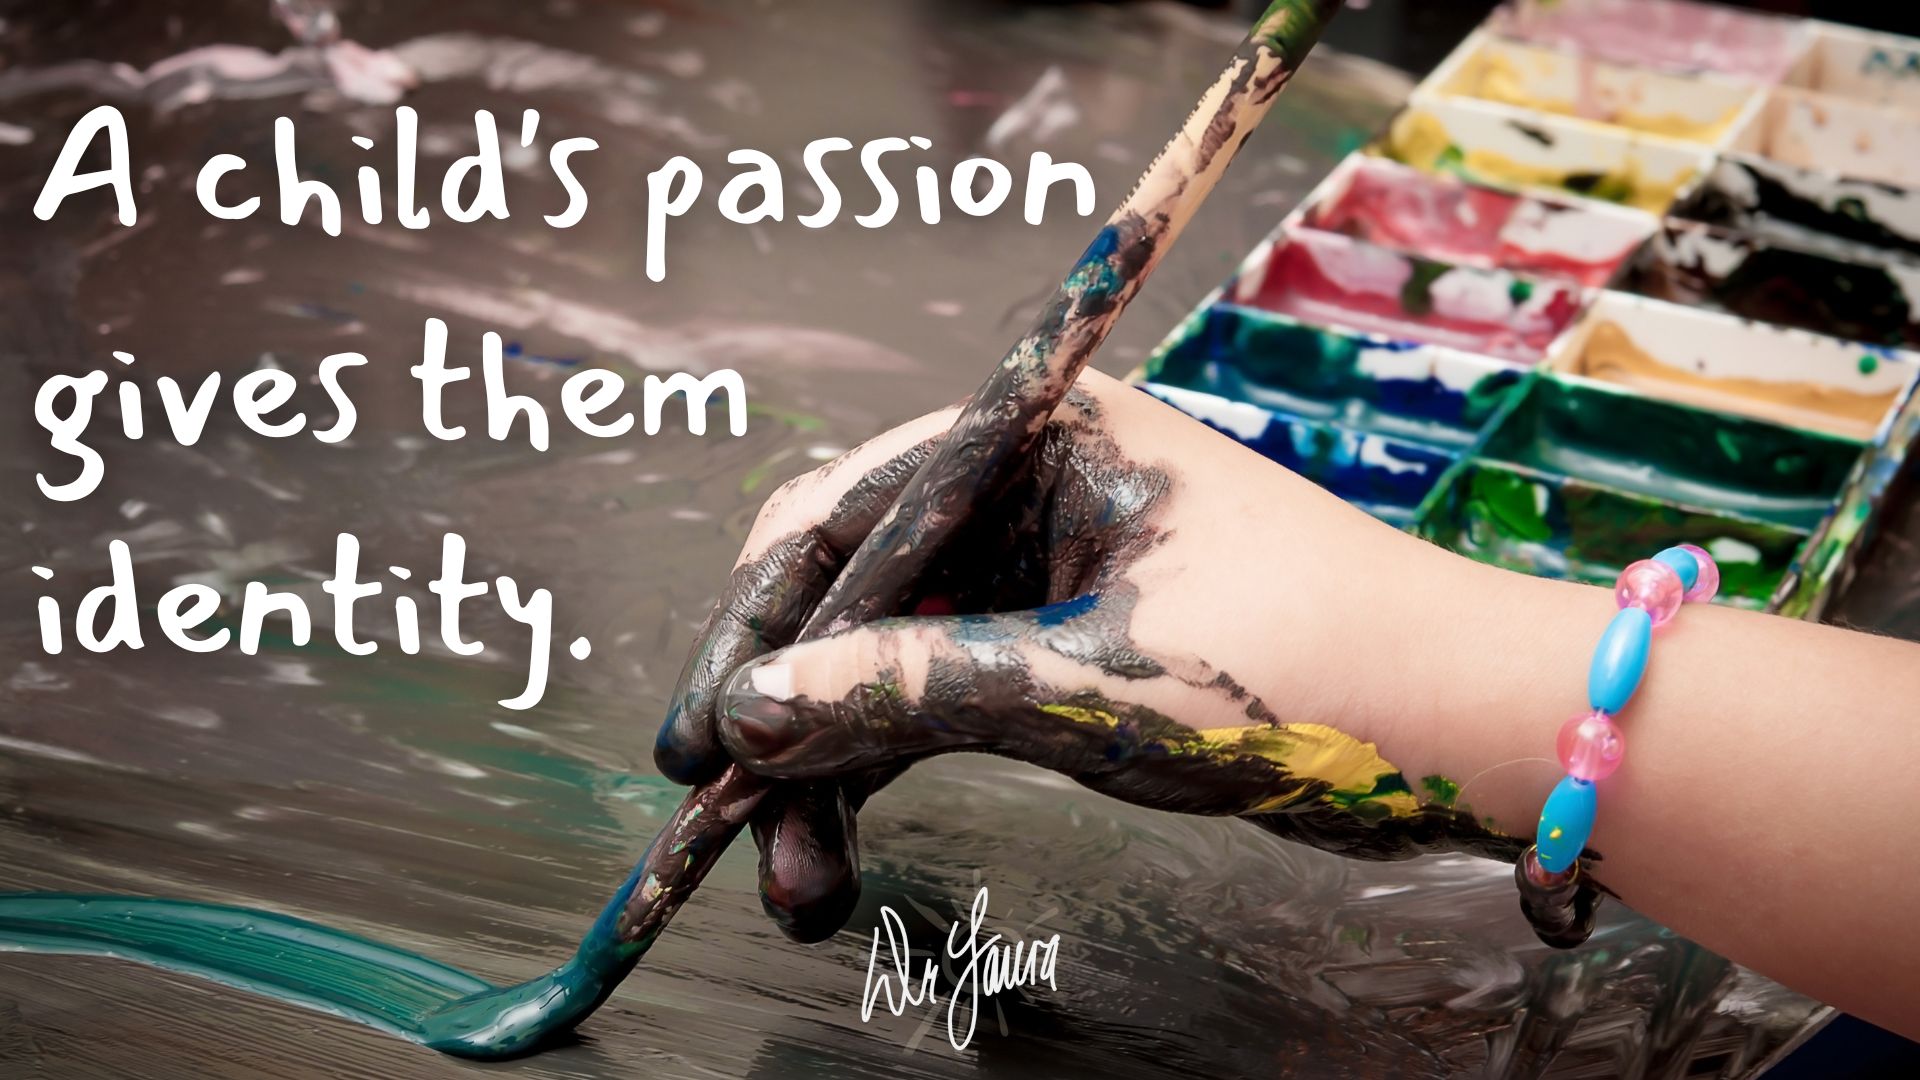 A child's passion gives them identity.